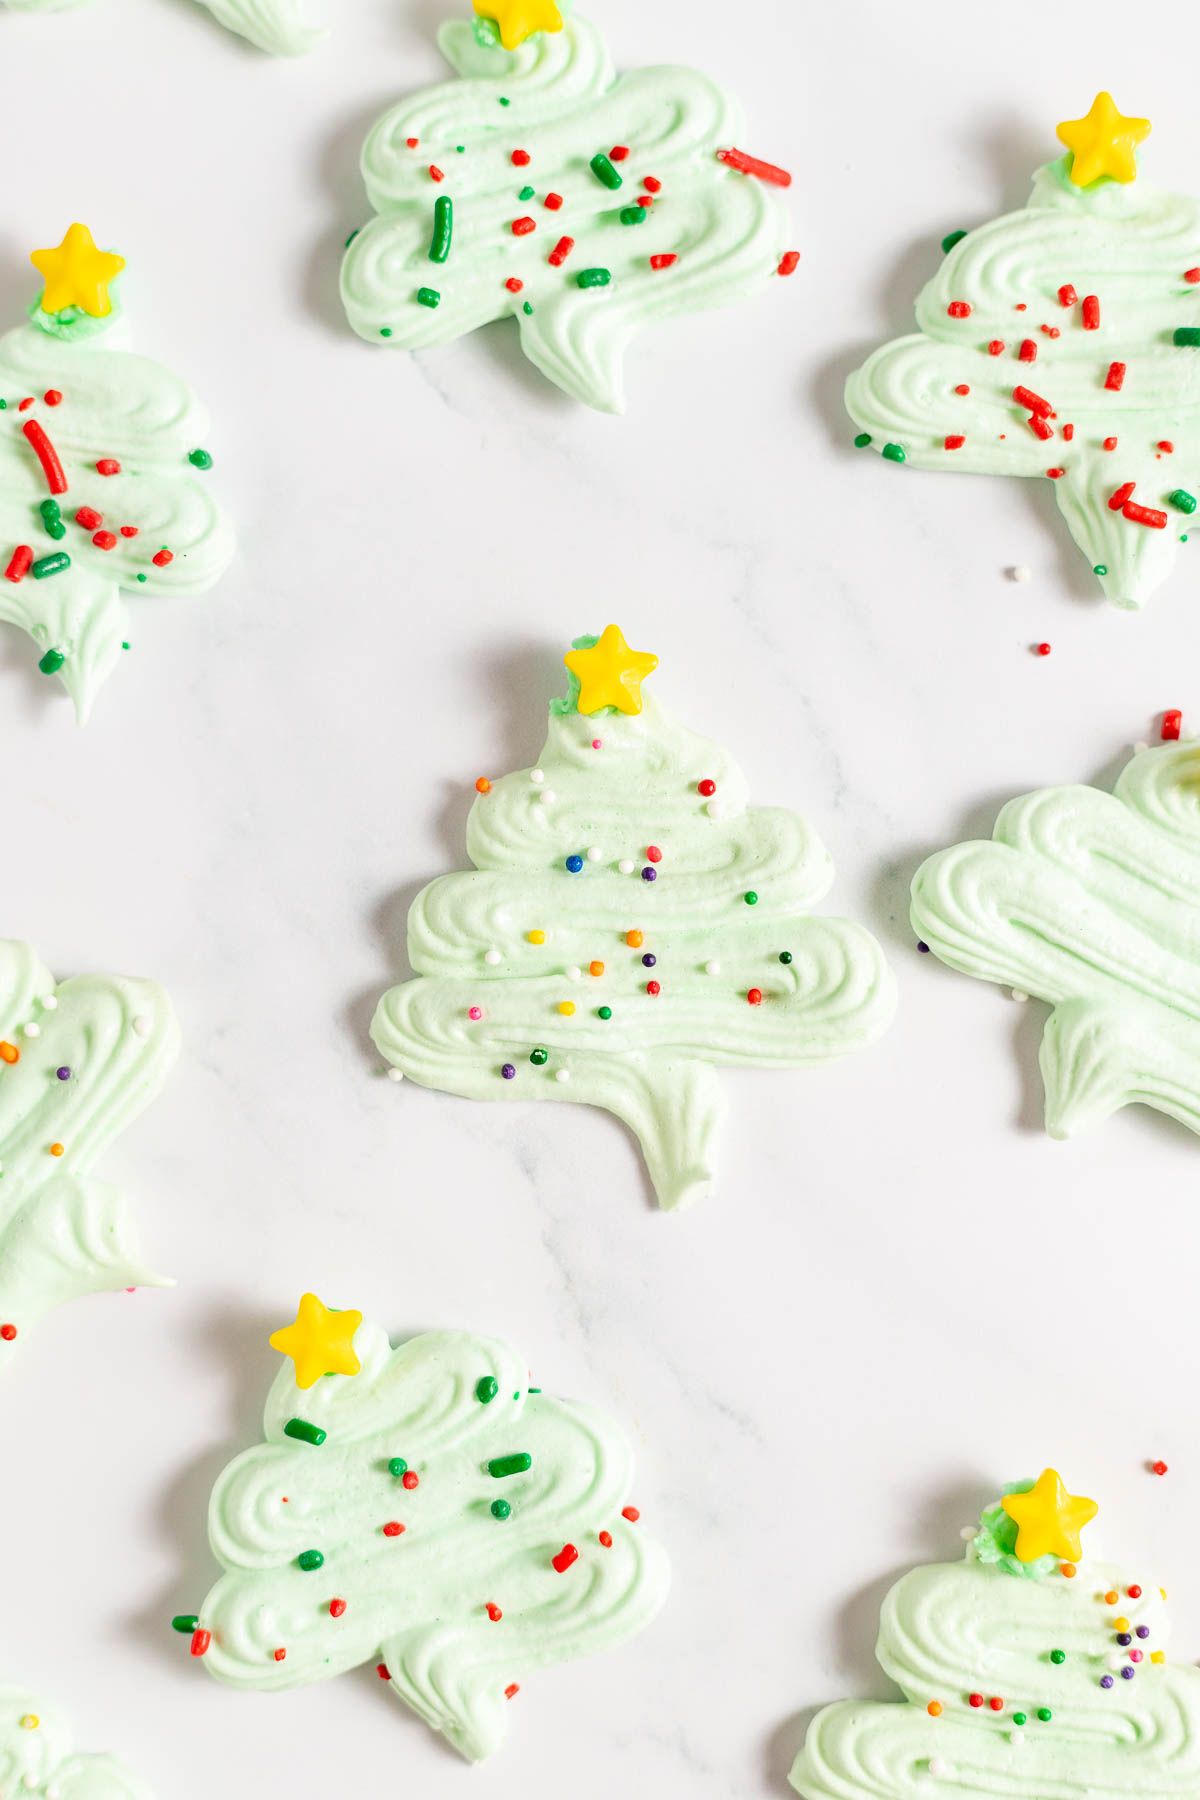 Pale green Christmas tree Meringue cookies against a white surface.